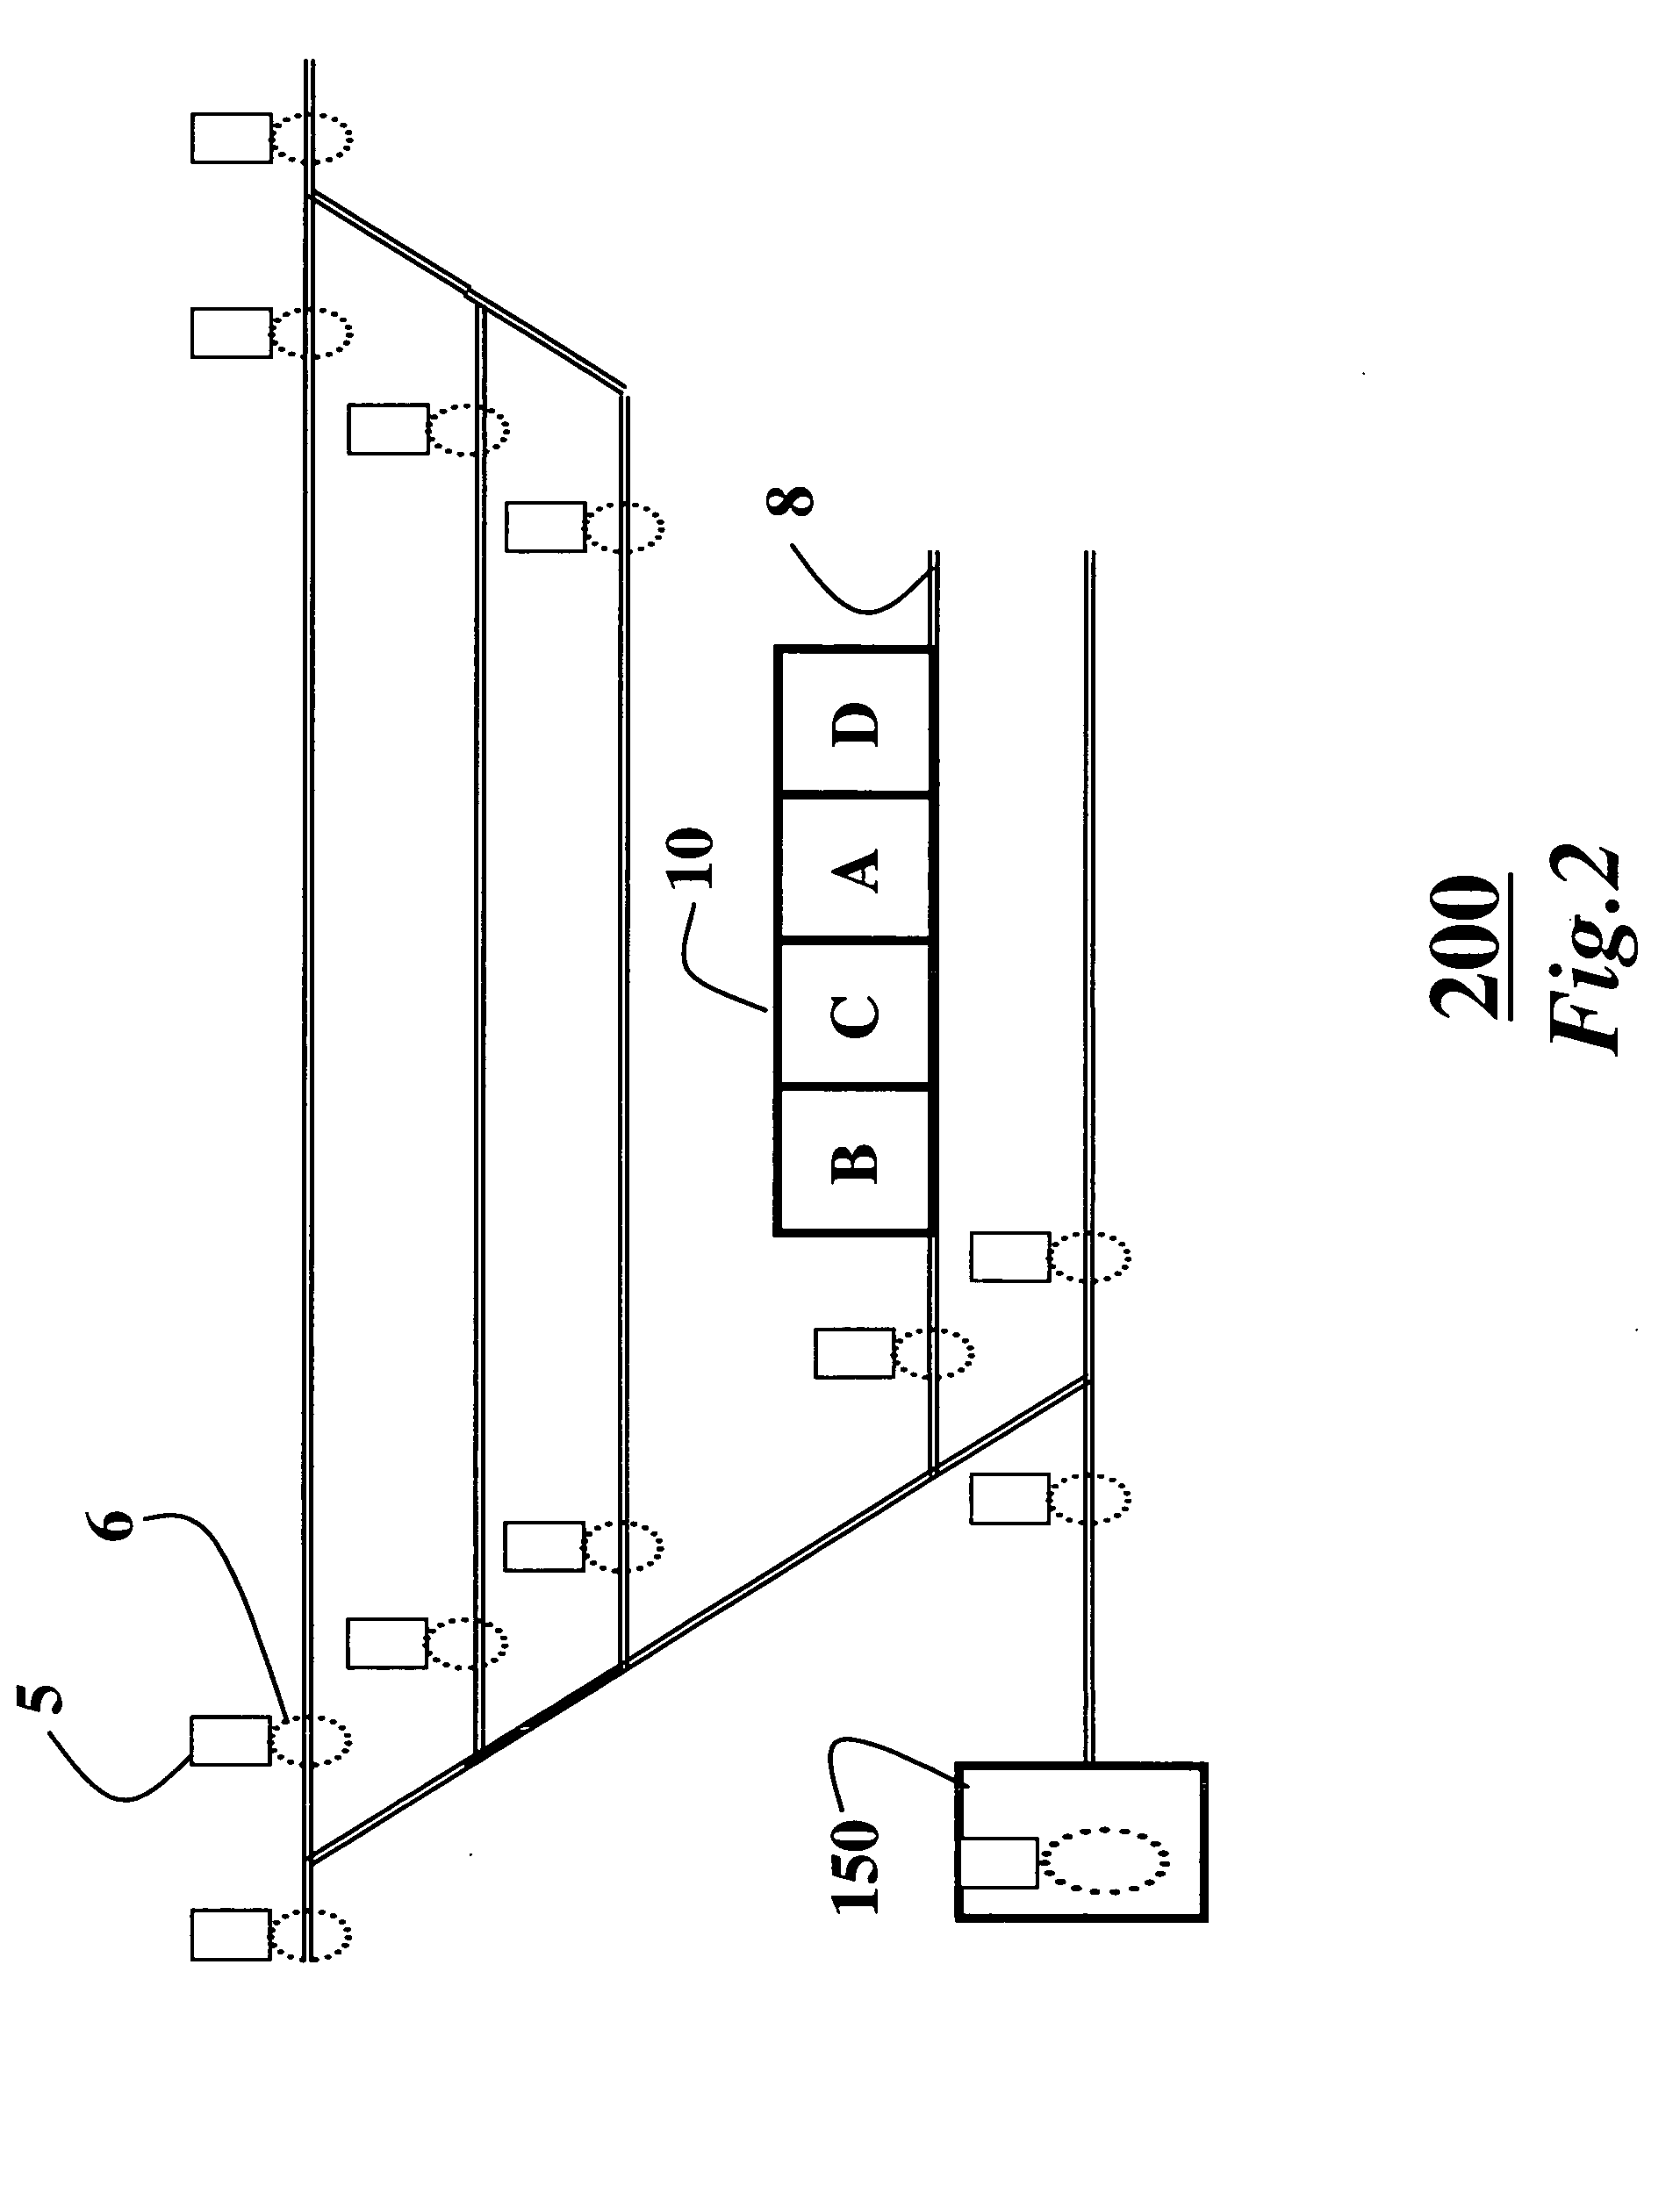 System for tracking railcars in a railroad environment